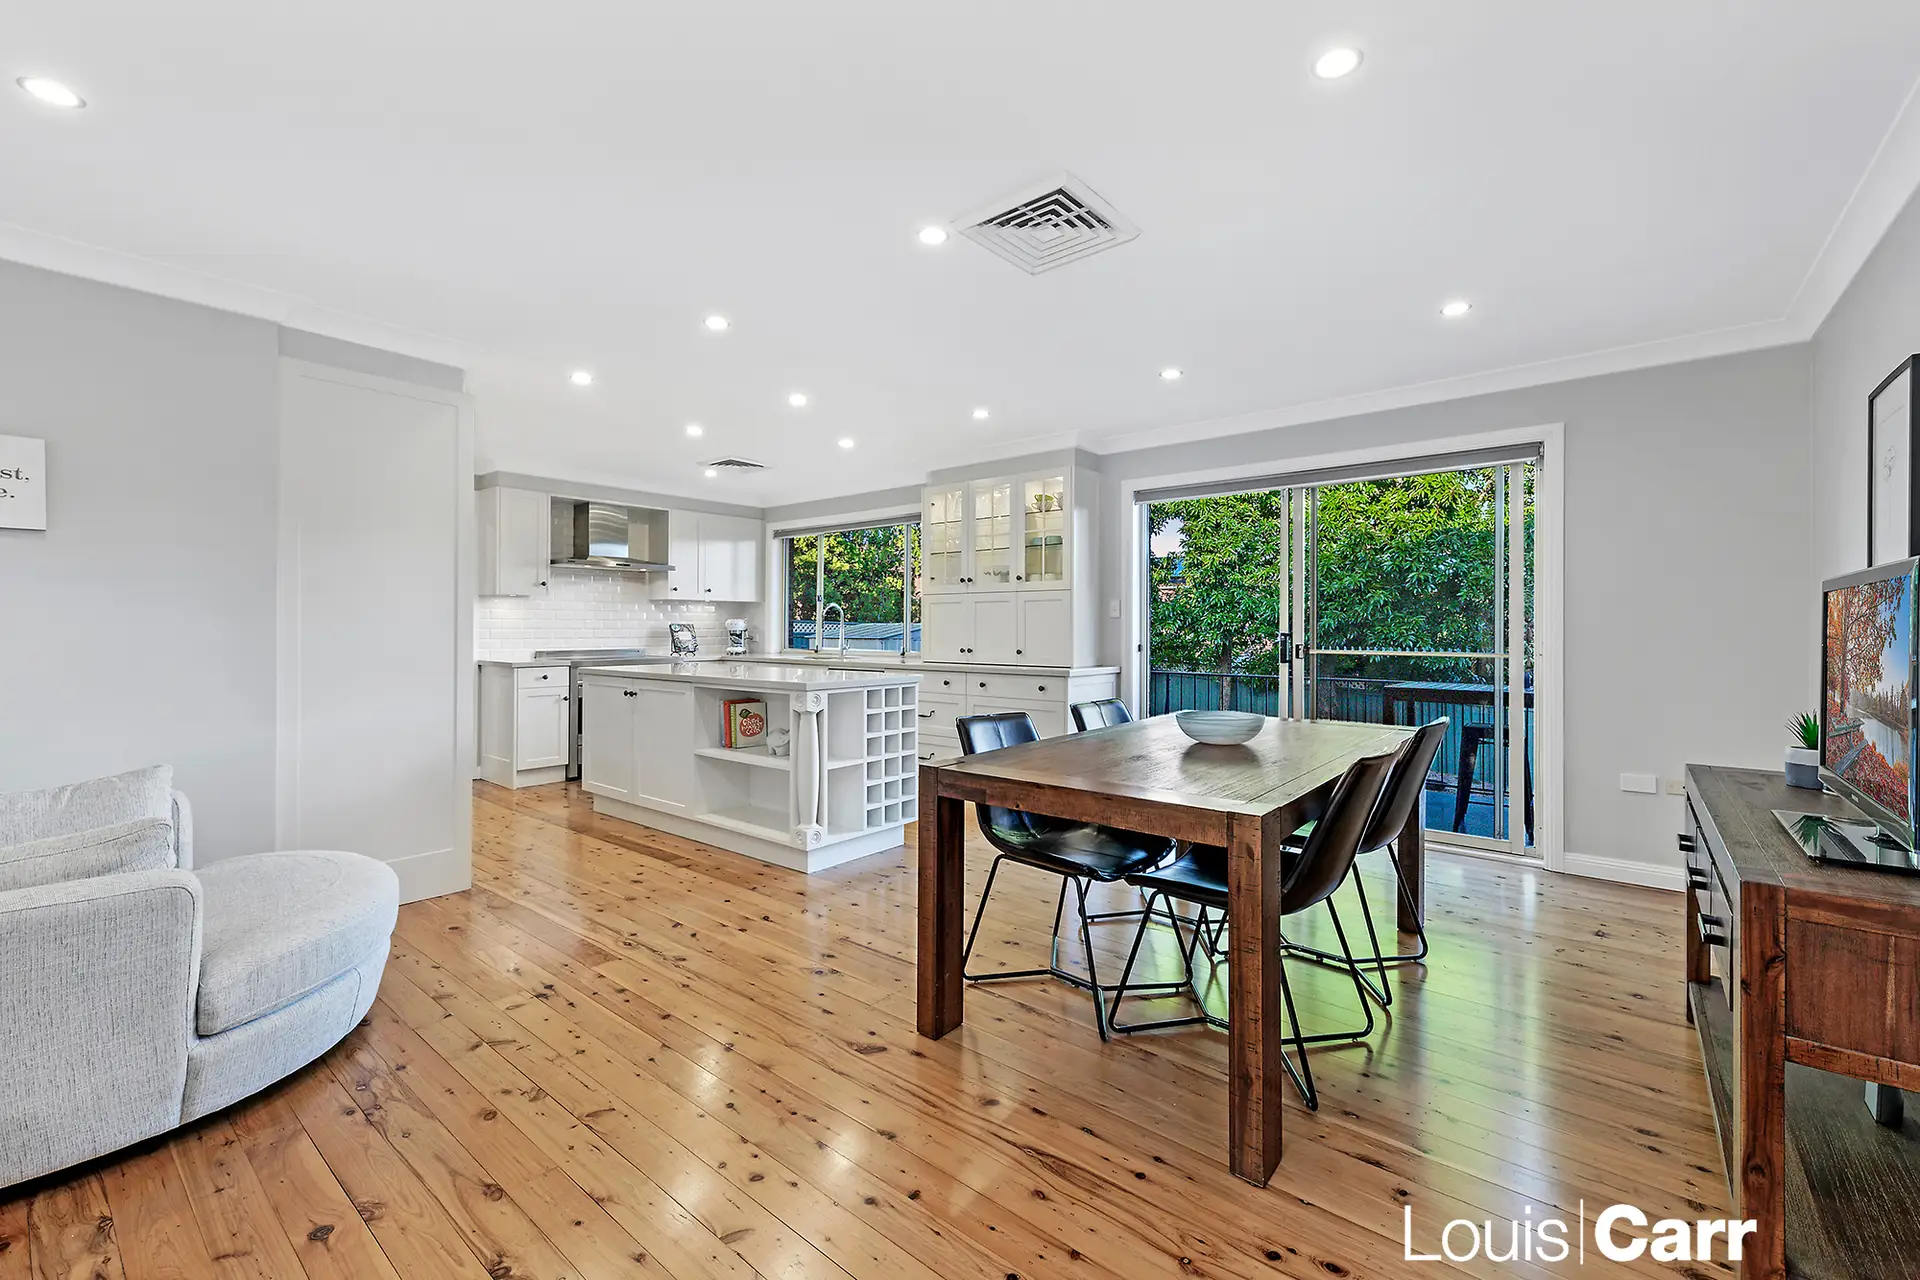 Photo #3: 23 Yaringa Road, Castle Hill - Sold by Louis Carr Real Estate